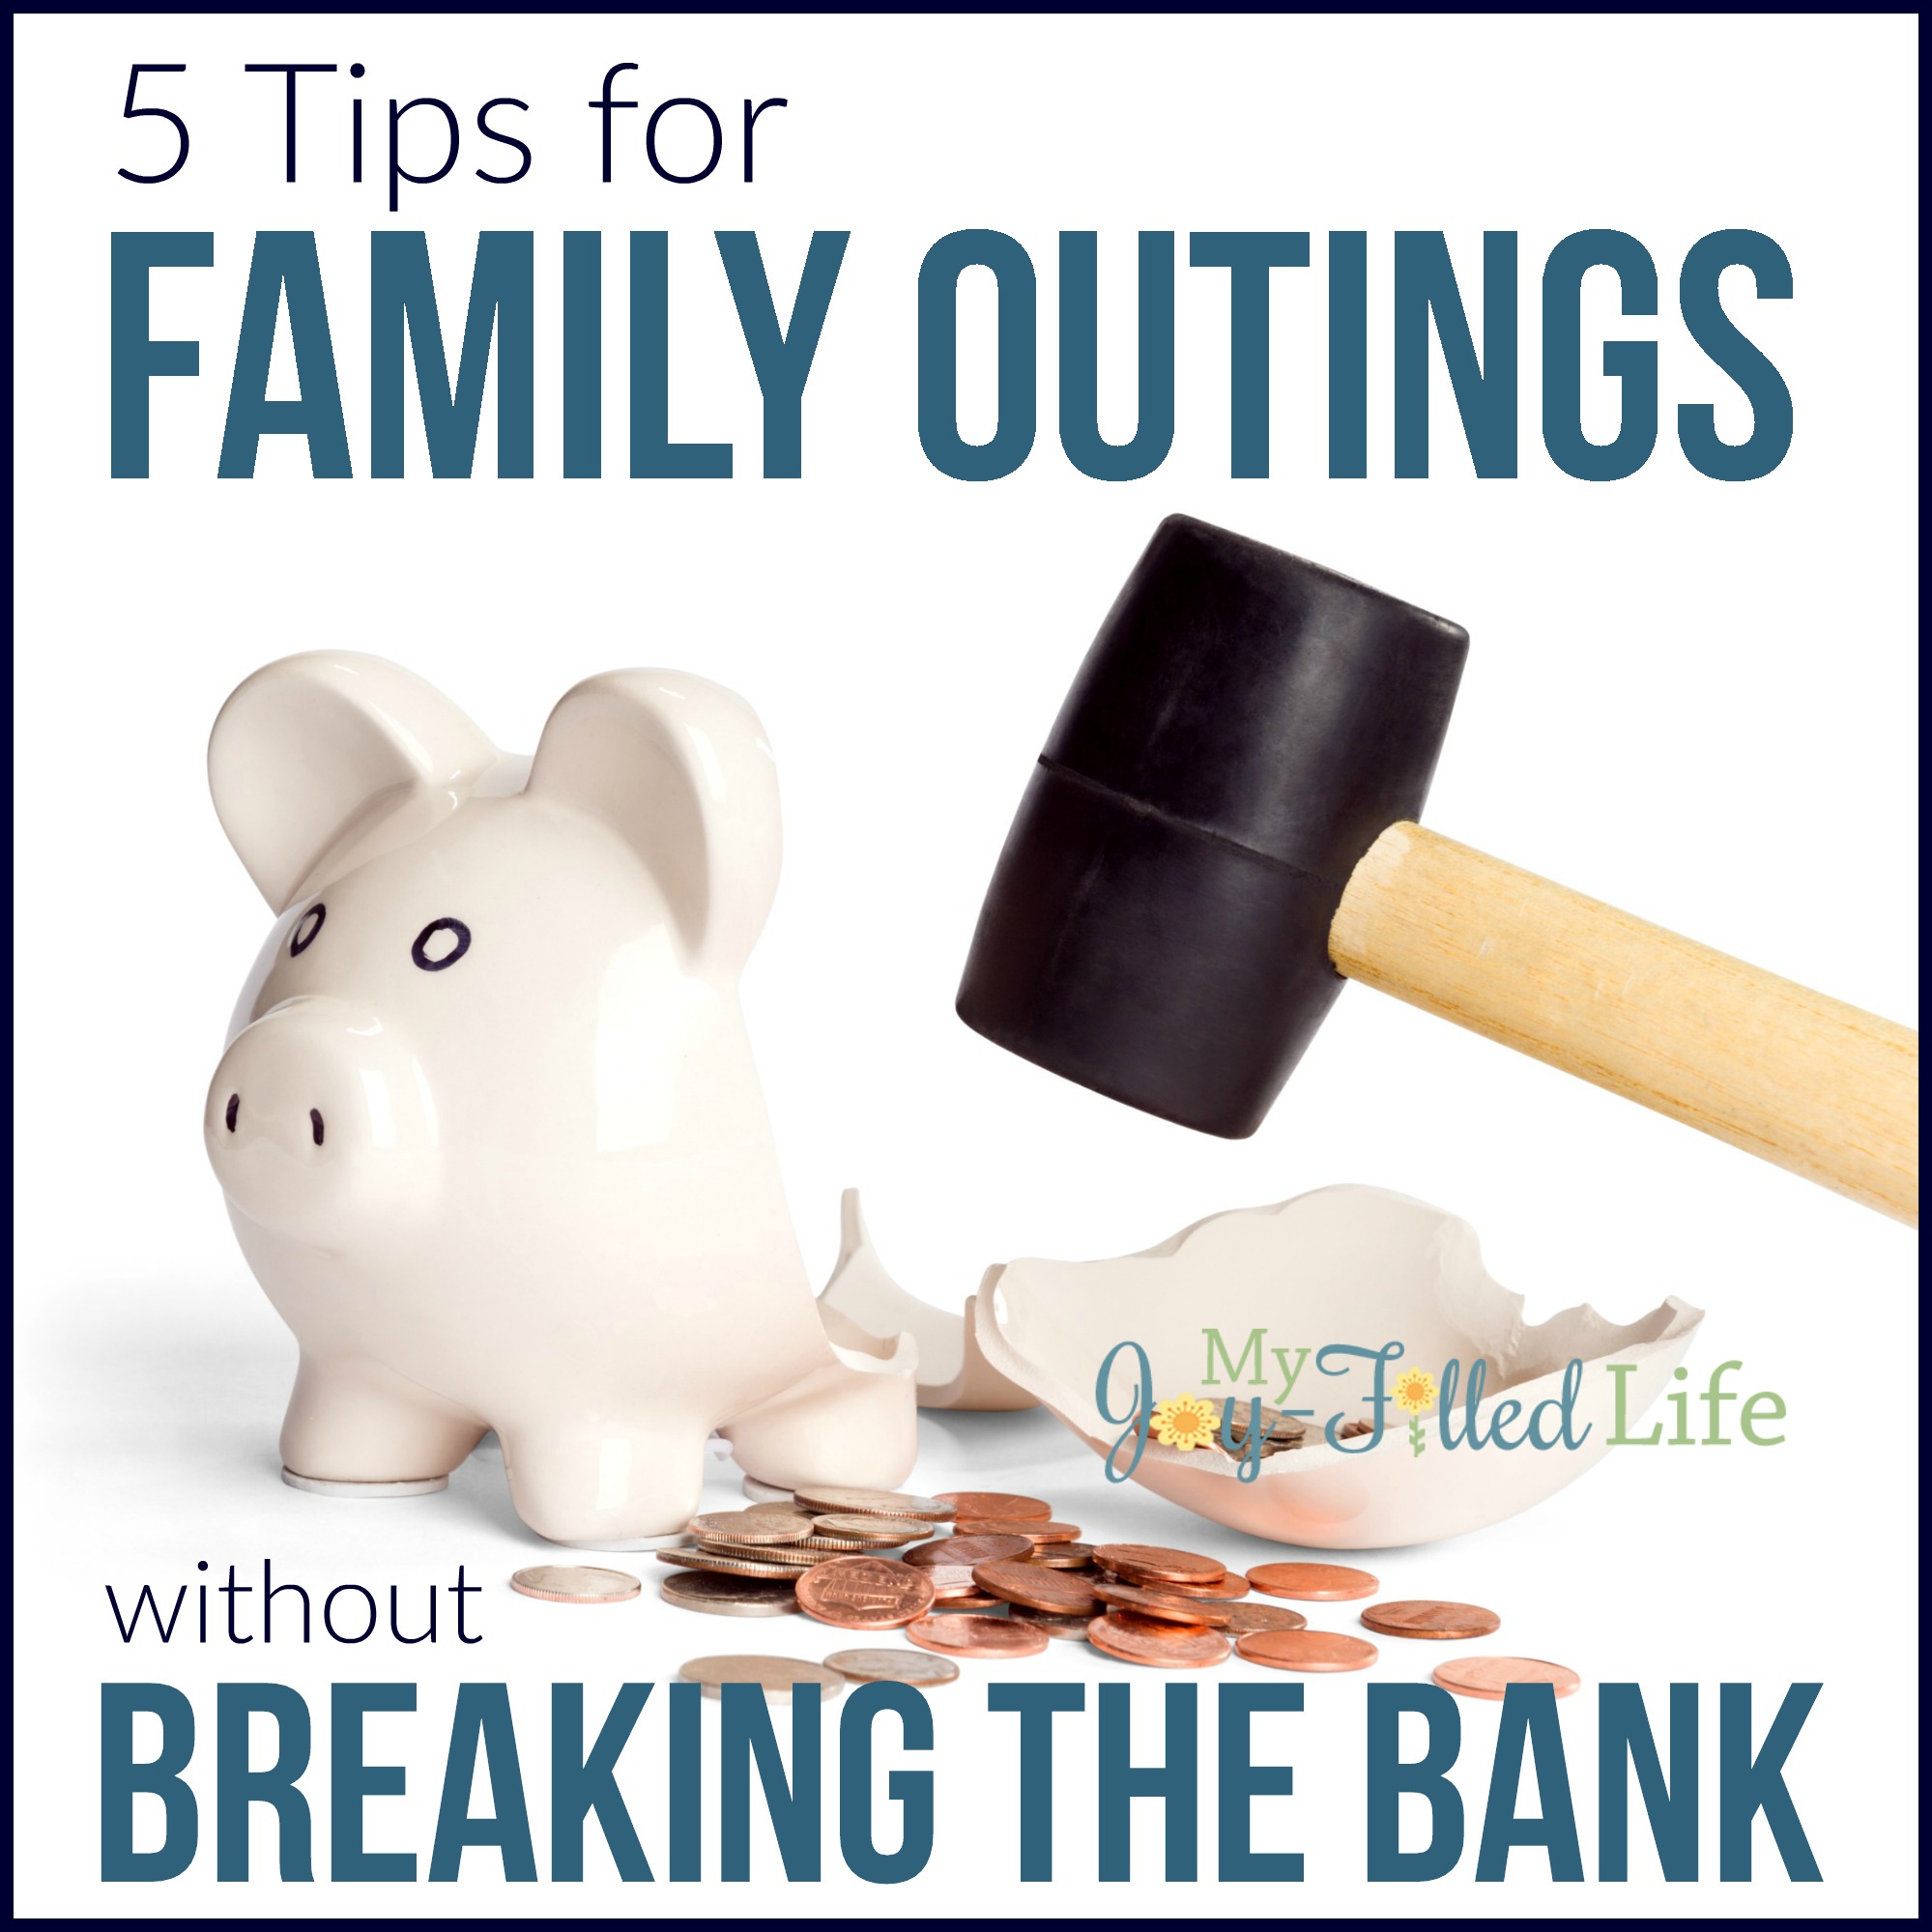 5 Tips for Family Outings Without Breaking the Bank